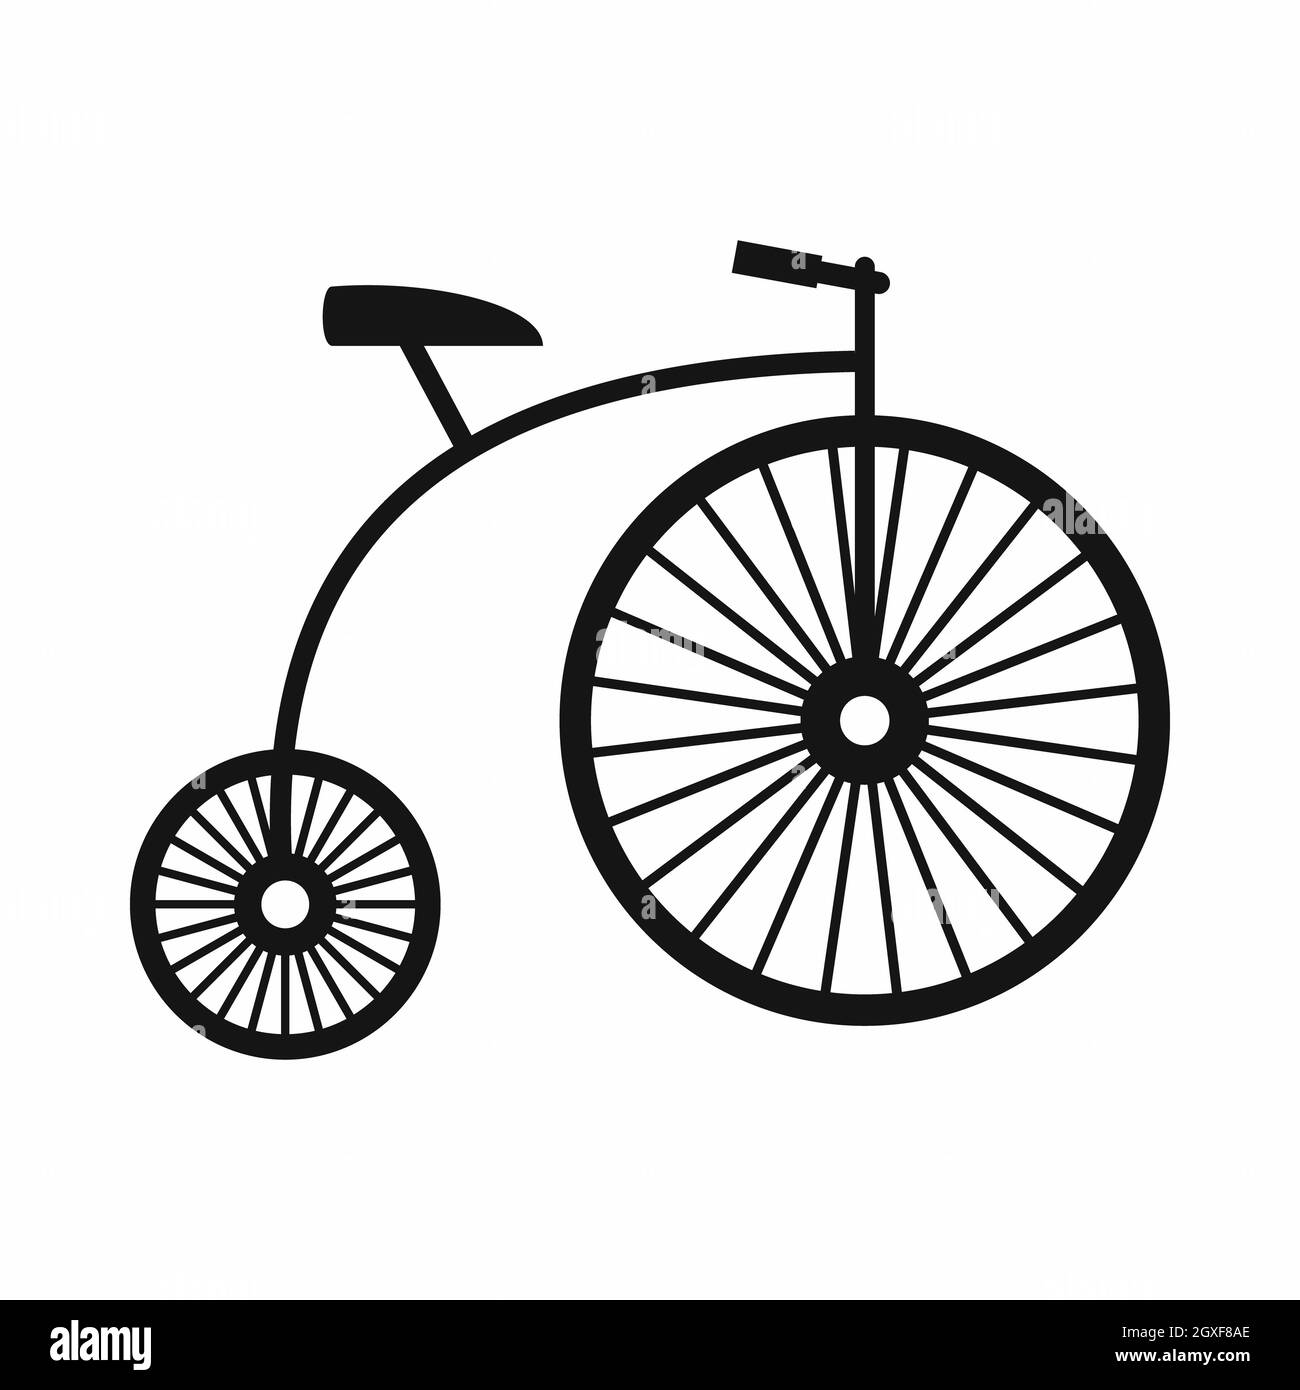 Penny-farthing icon in simple style isolated on white background Stock Photo